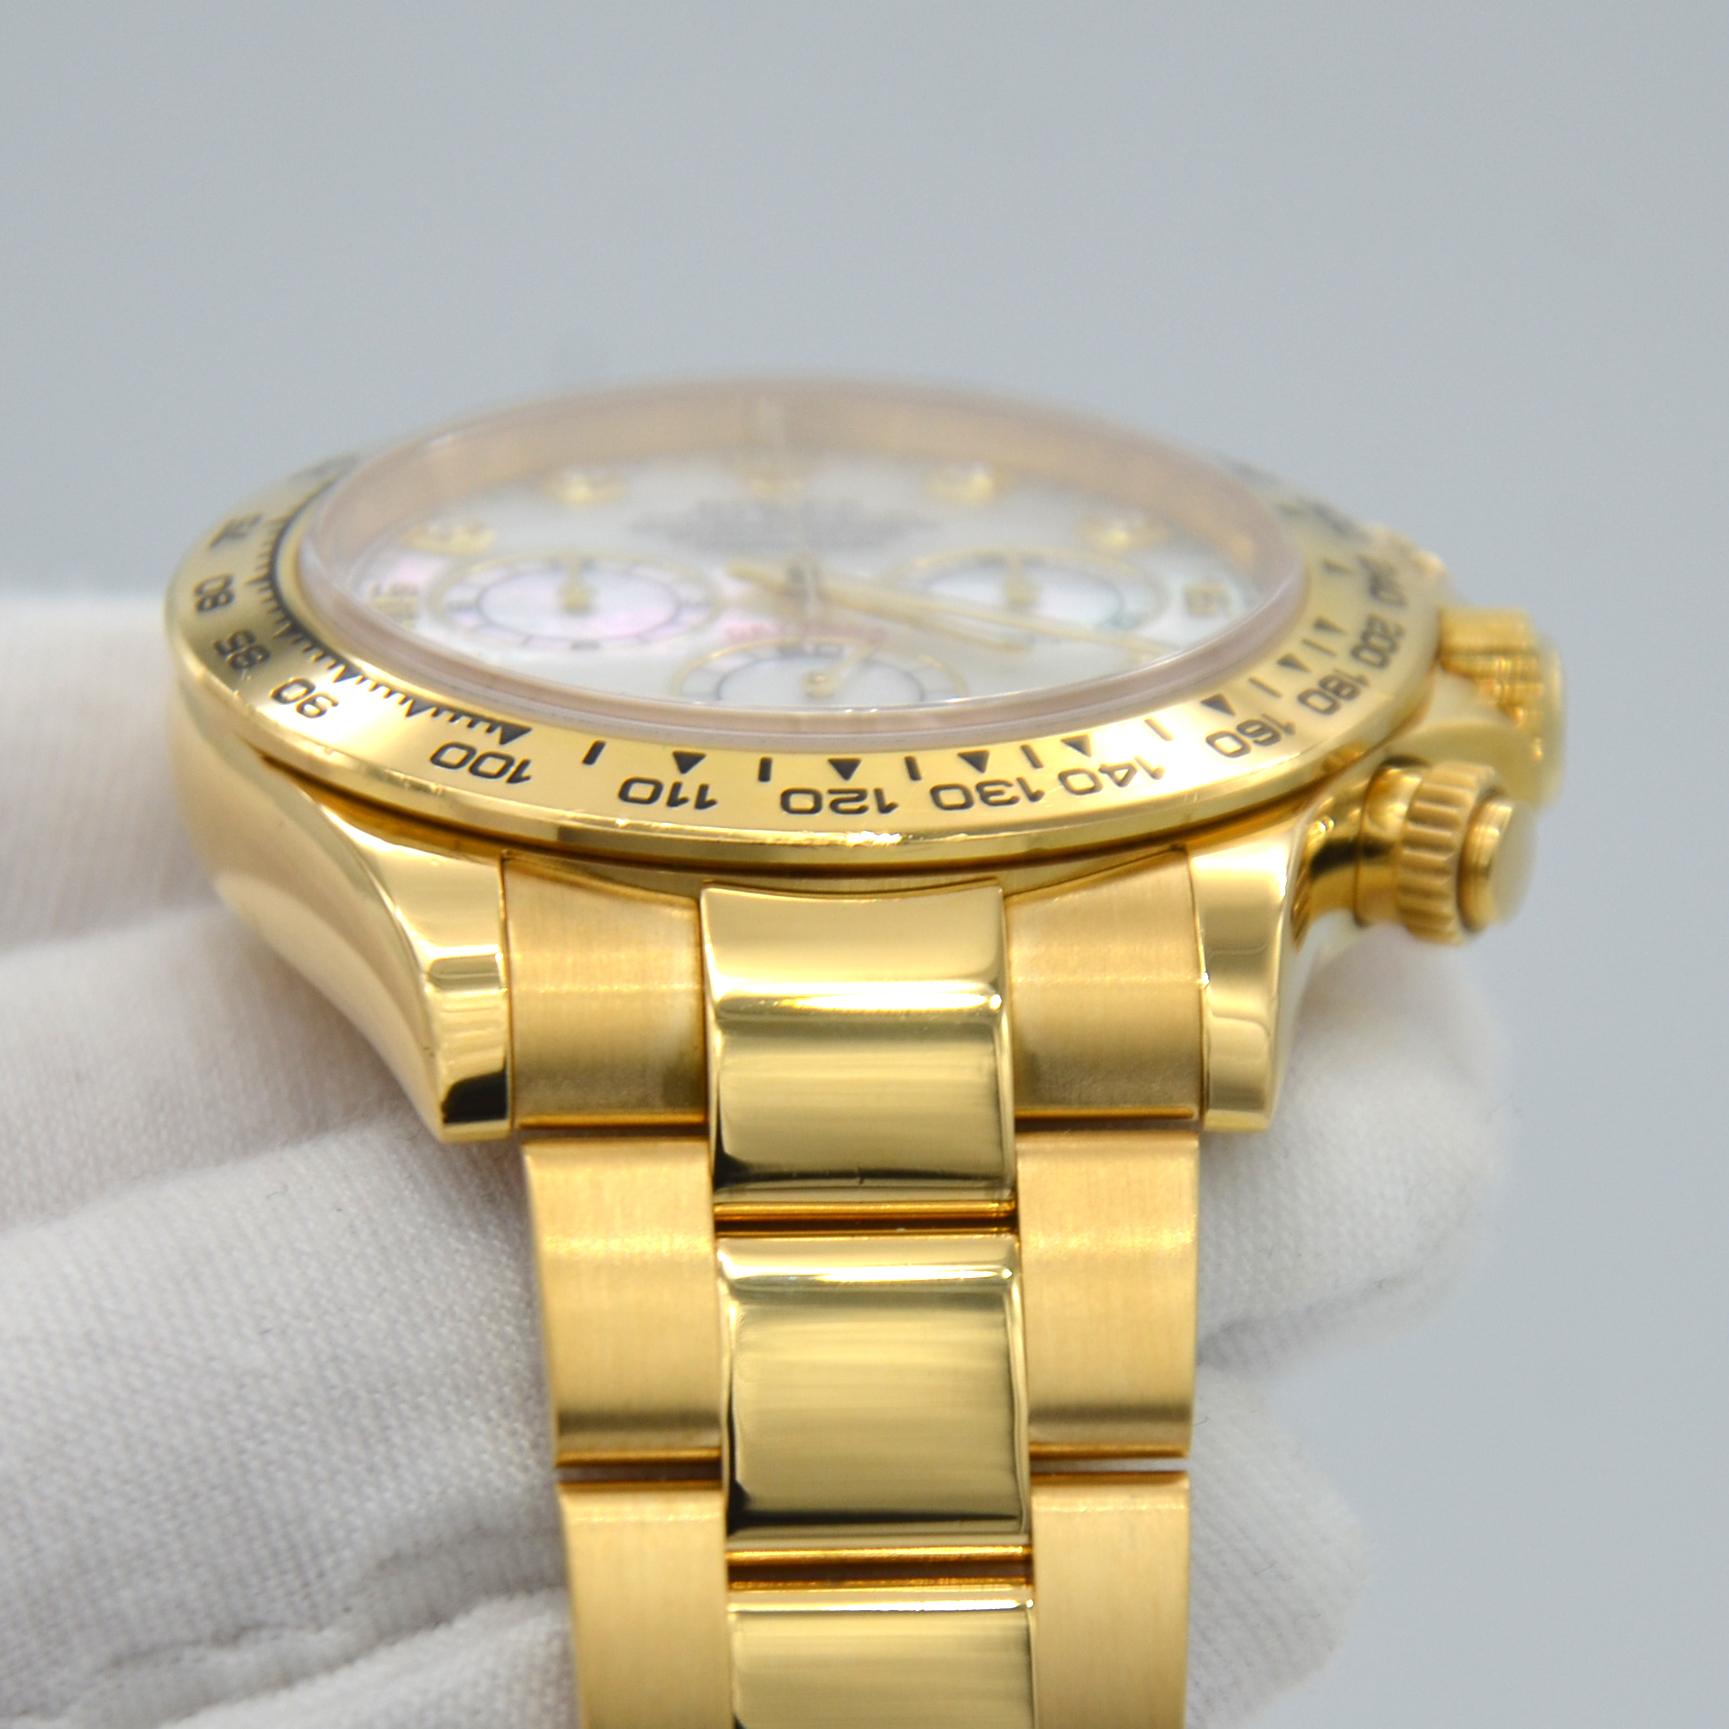 Rolex Daytona, White Mother of Pearl Diamond Dial In Excellent Condition For Sale In New York, NY